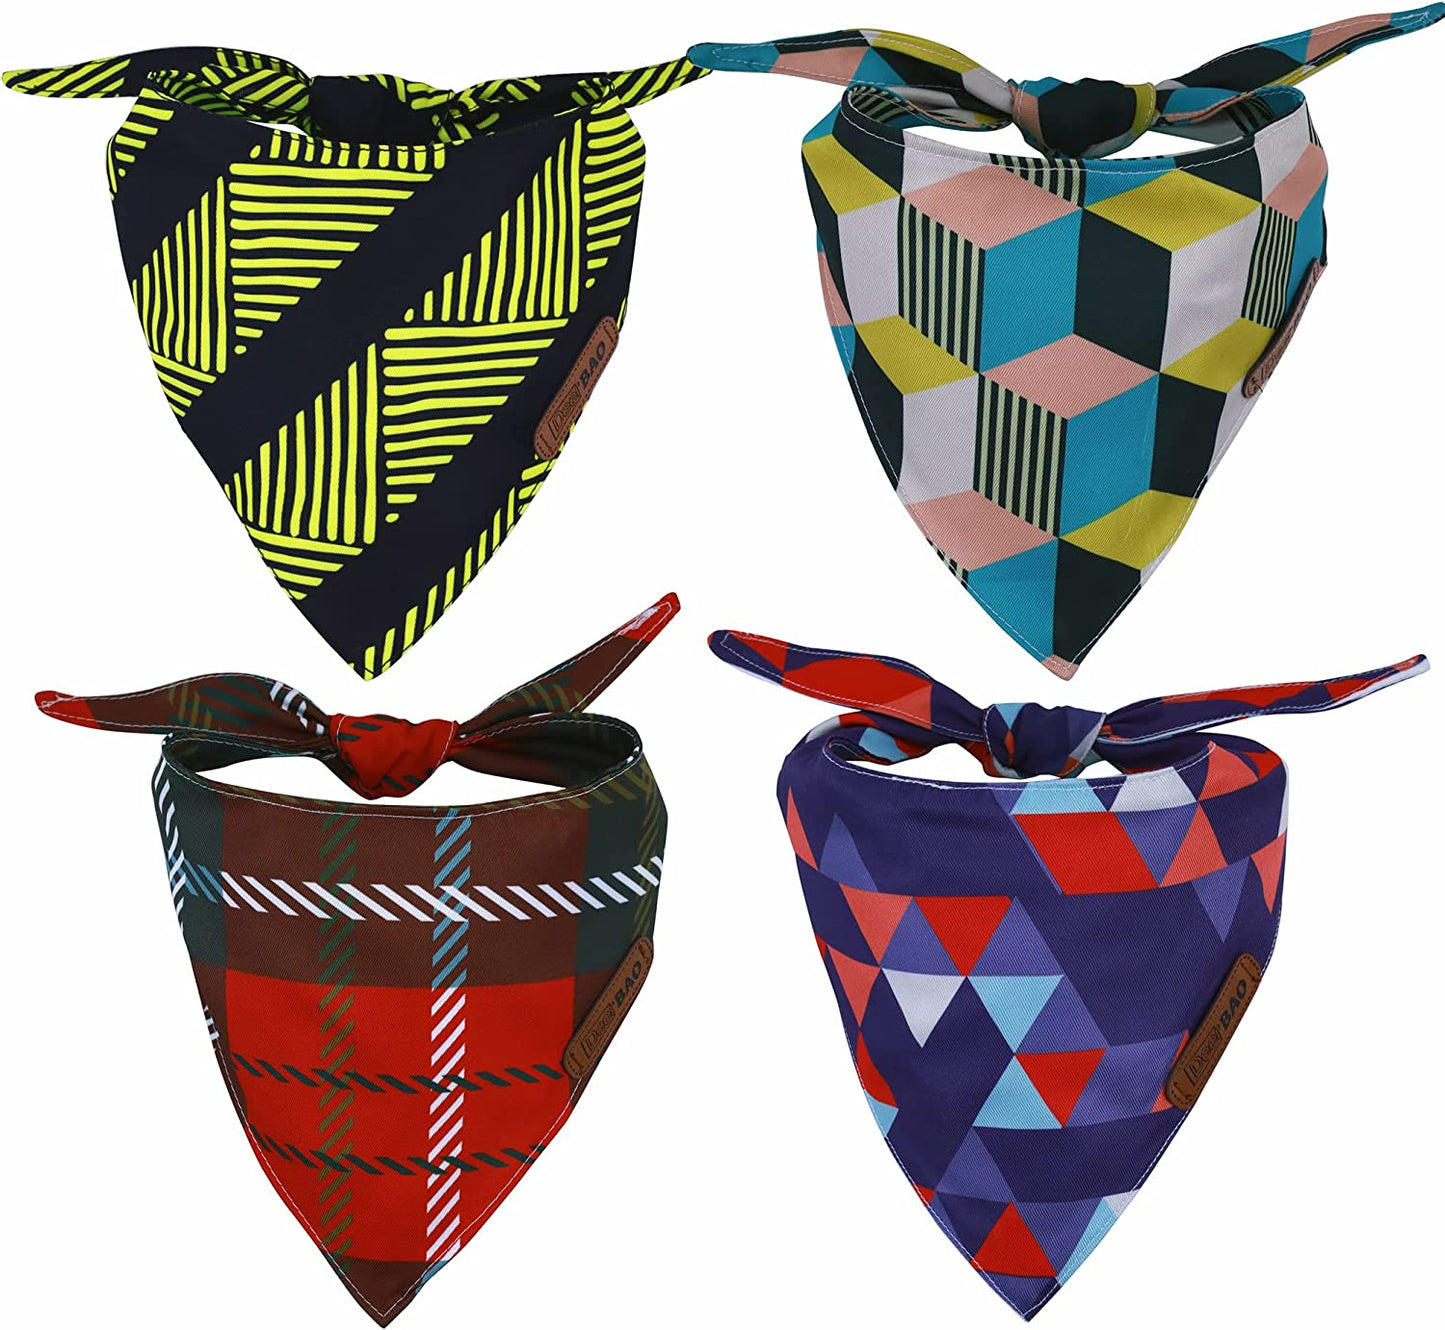 Deerbao Dog Bandanas 4Pack,Dog Scarf,Dog Bandanas Boygirl,Premium Durable Fabric,Adjustable Fit,Unique Shape,Suitable for All Kinds of Dogs,Provide Various Sizes (Large, Classic Plaid) Animals & Pet Supplies > Pet Supplies > Dog Supplies > Dog Apparel DeerBAO Plaid Large 